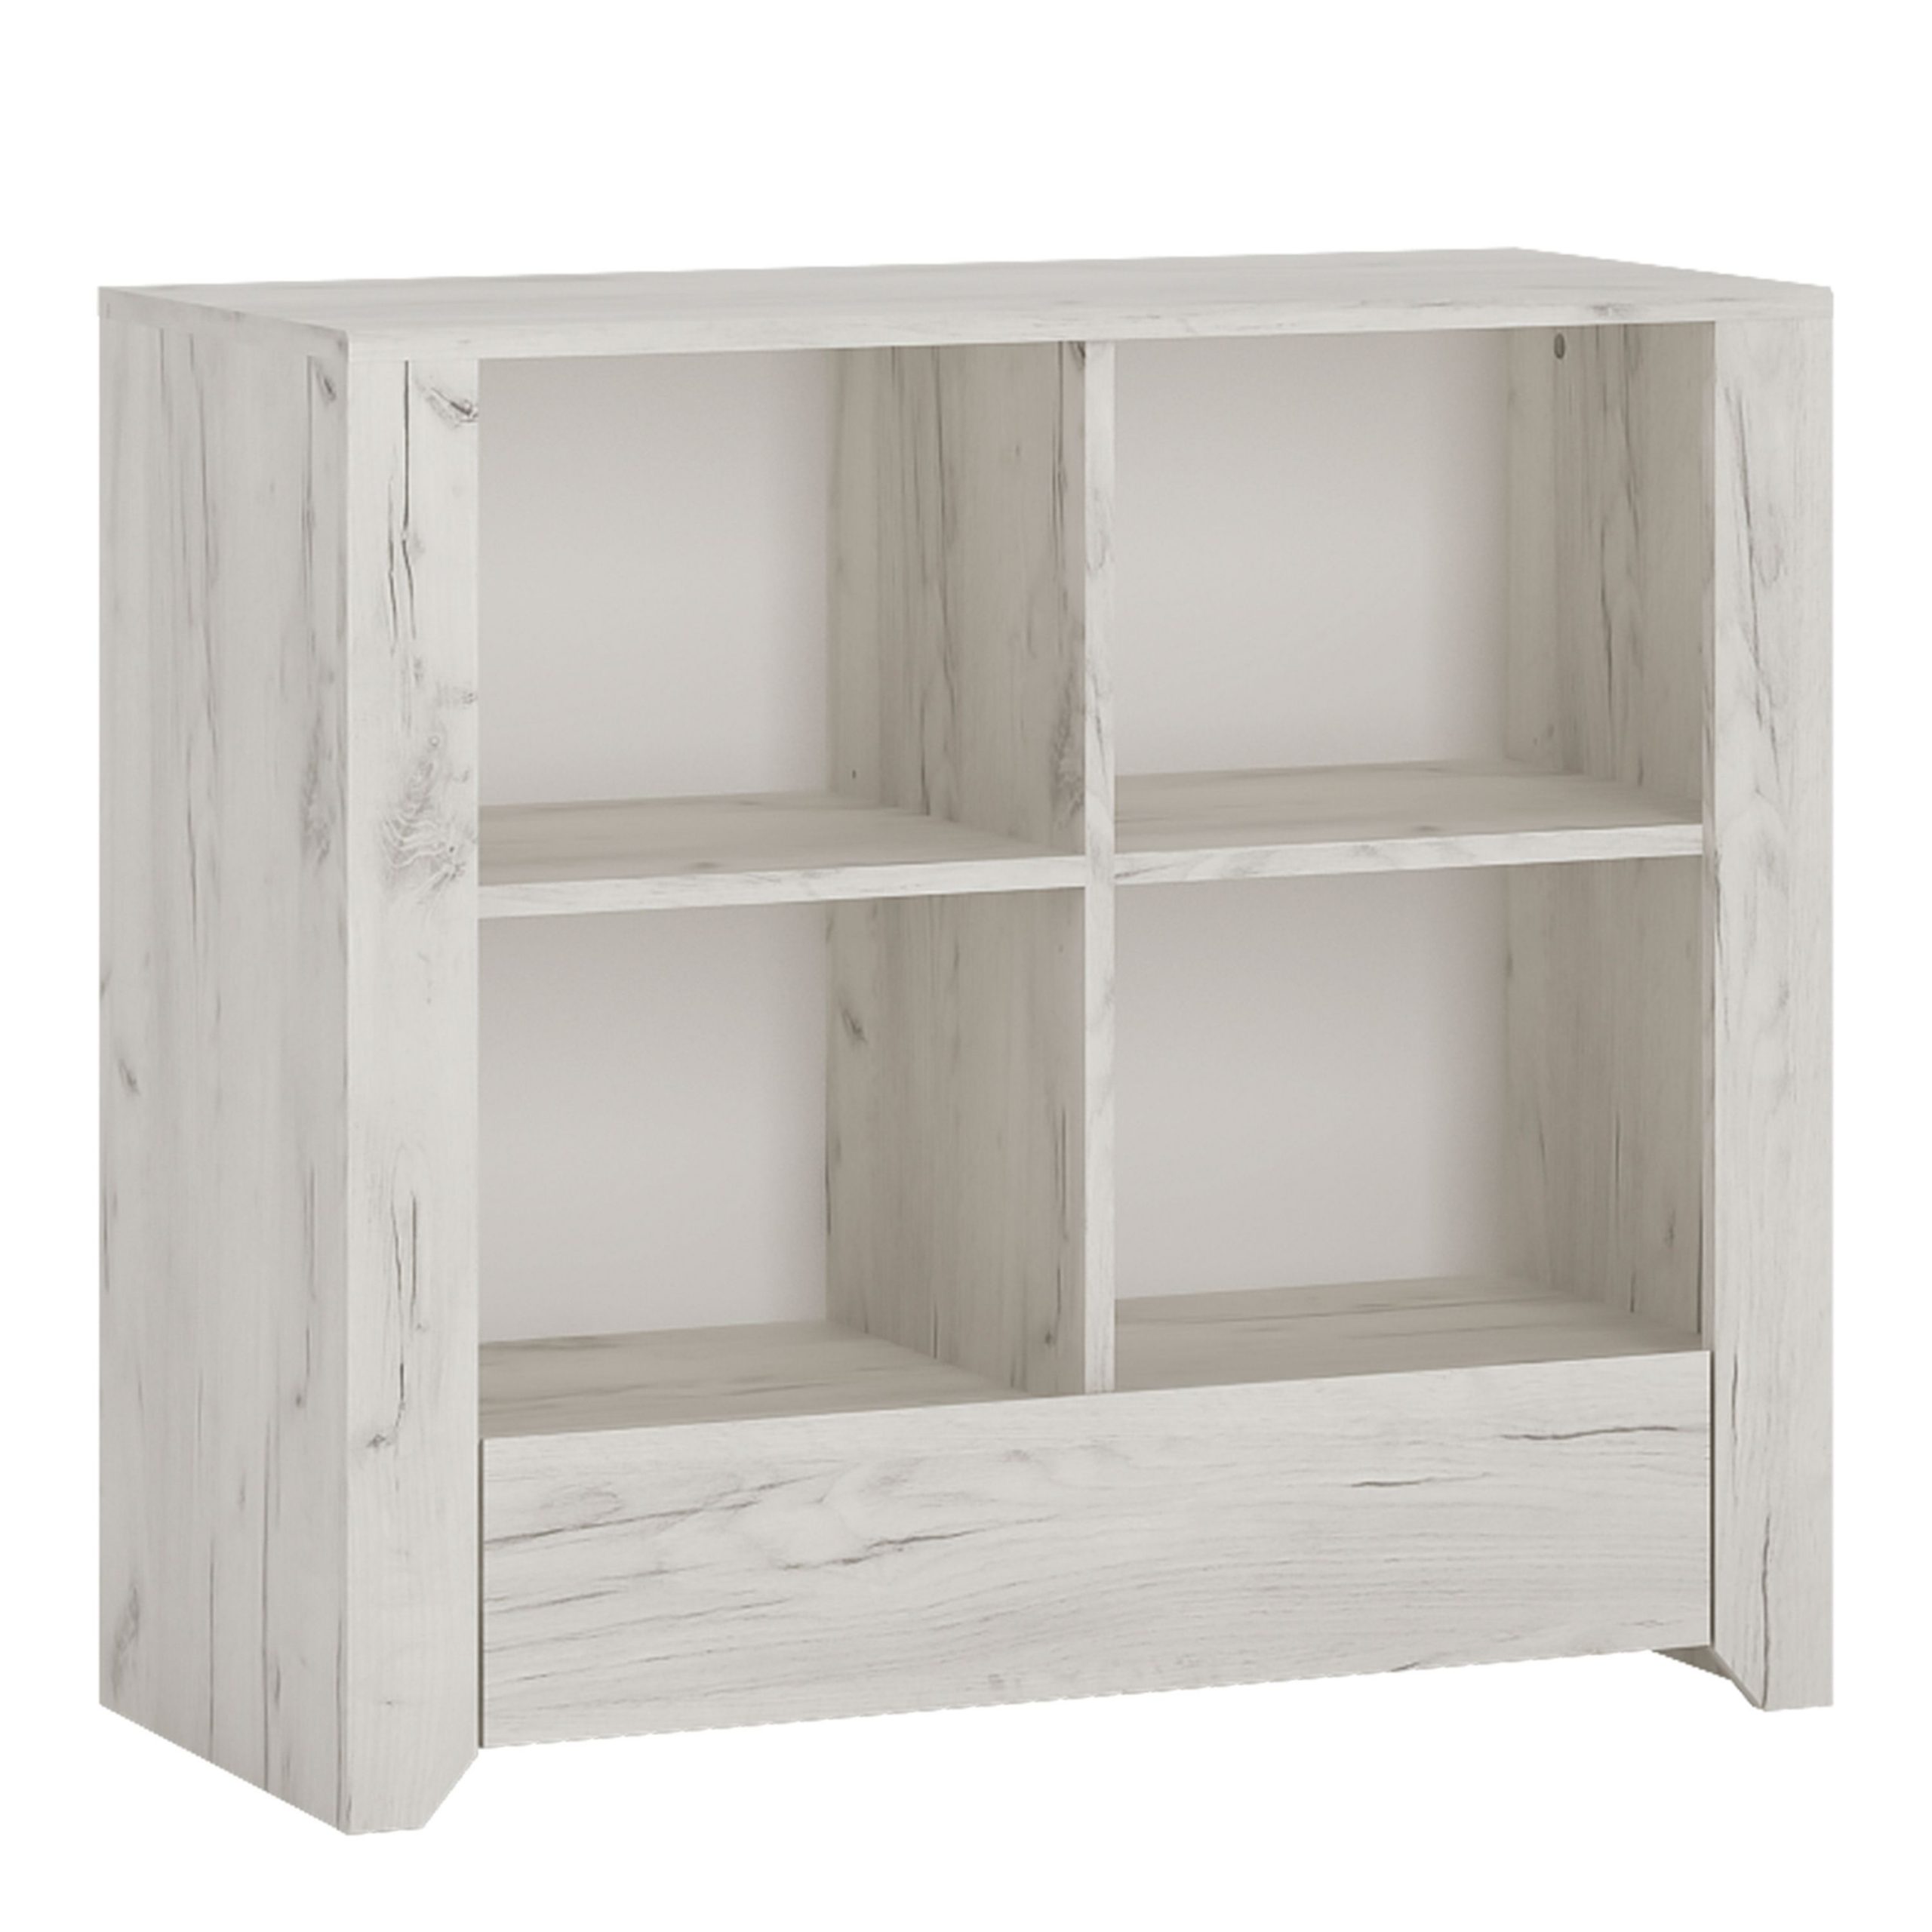 Angel 1 Drawer Low Bookcase In White Craft Oak